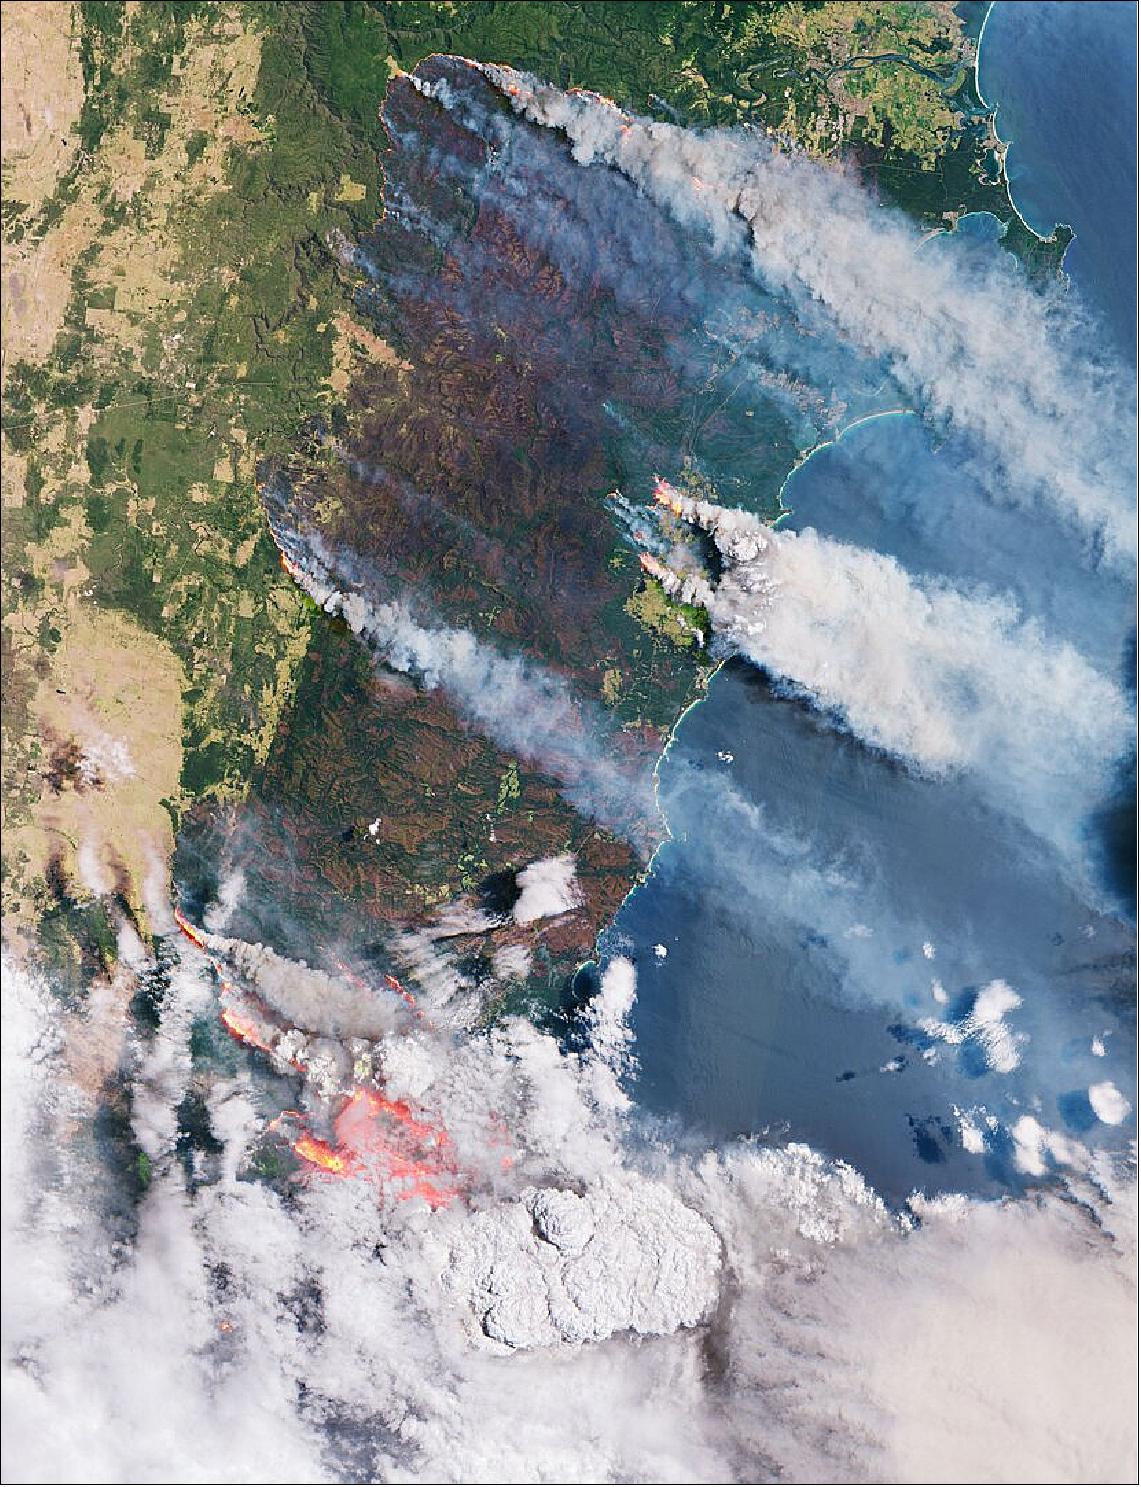 Figure 68: The Copernicus Sentinel-2 mission has been used to image the fires. The Sentinel-2 satellites each carry just one instrument – a high-resolution multispectral imager with 13 spectral bands. The smoke, flames and burn scars can be seen clearly in the image shown here, which was captured on 31 December 2019. The large brownish areas depict burned vegetation and provide an idea of the size of the area affected by the fires here – the brown ‘strip’ running through the image has a width of approximately 50 km and stretches for at least 100 km along the Australian east coast (image credit: ESA, the image contains modified Copernicus Sentinel data (2019), processed by ESA, CC BY-SA 3.0 IGO)